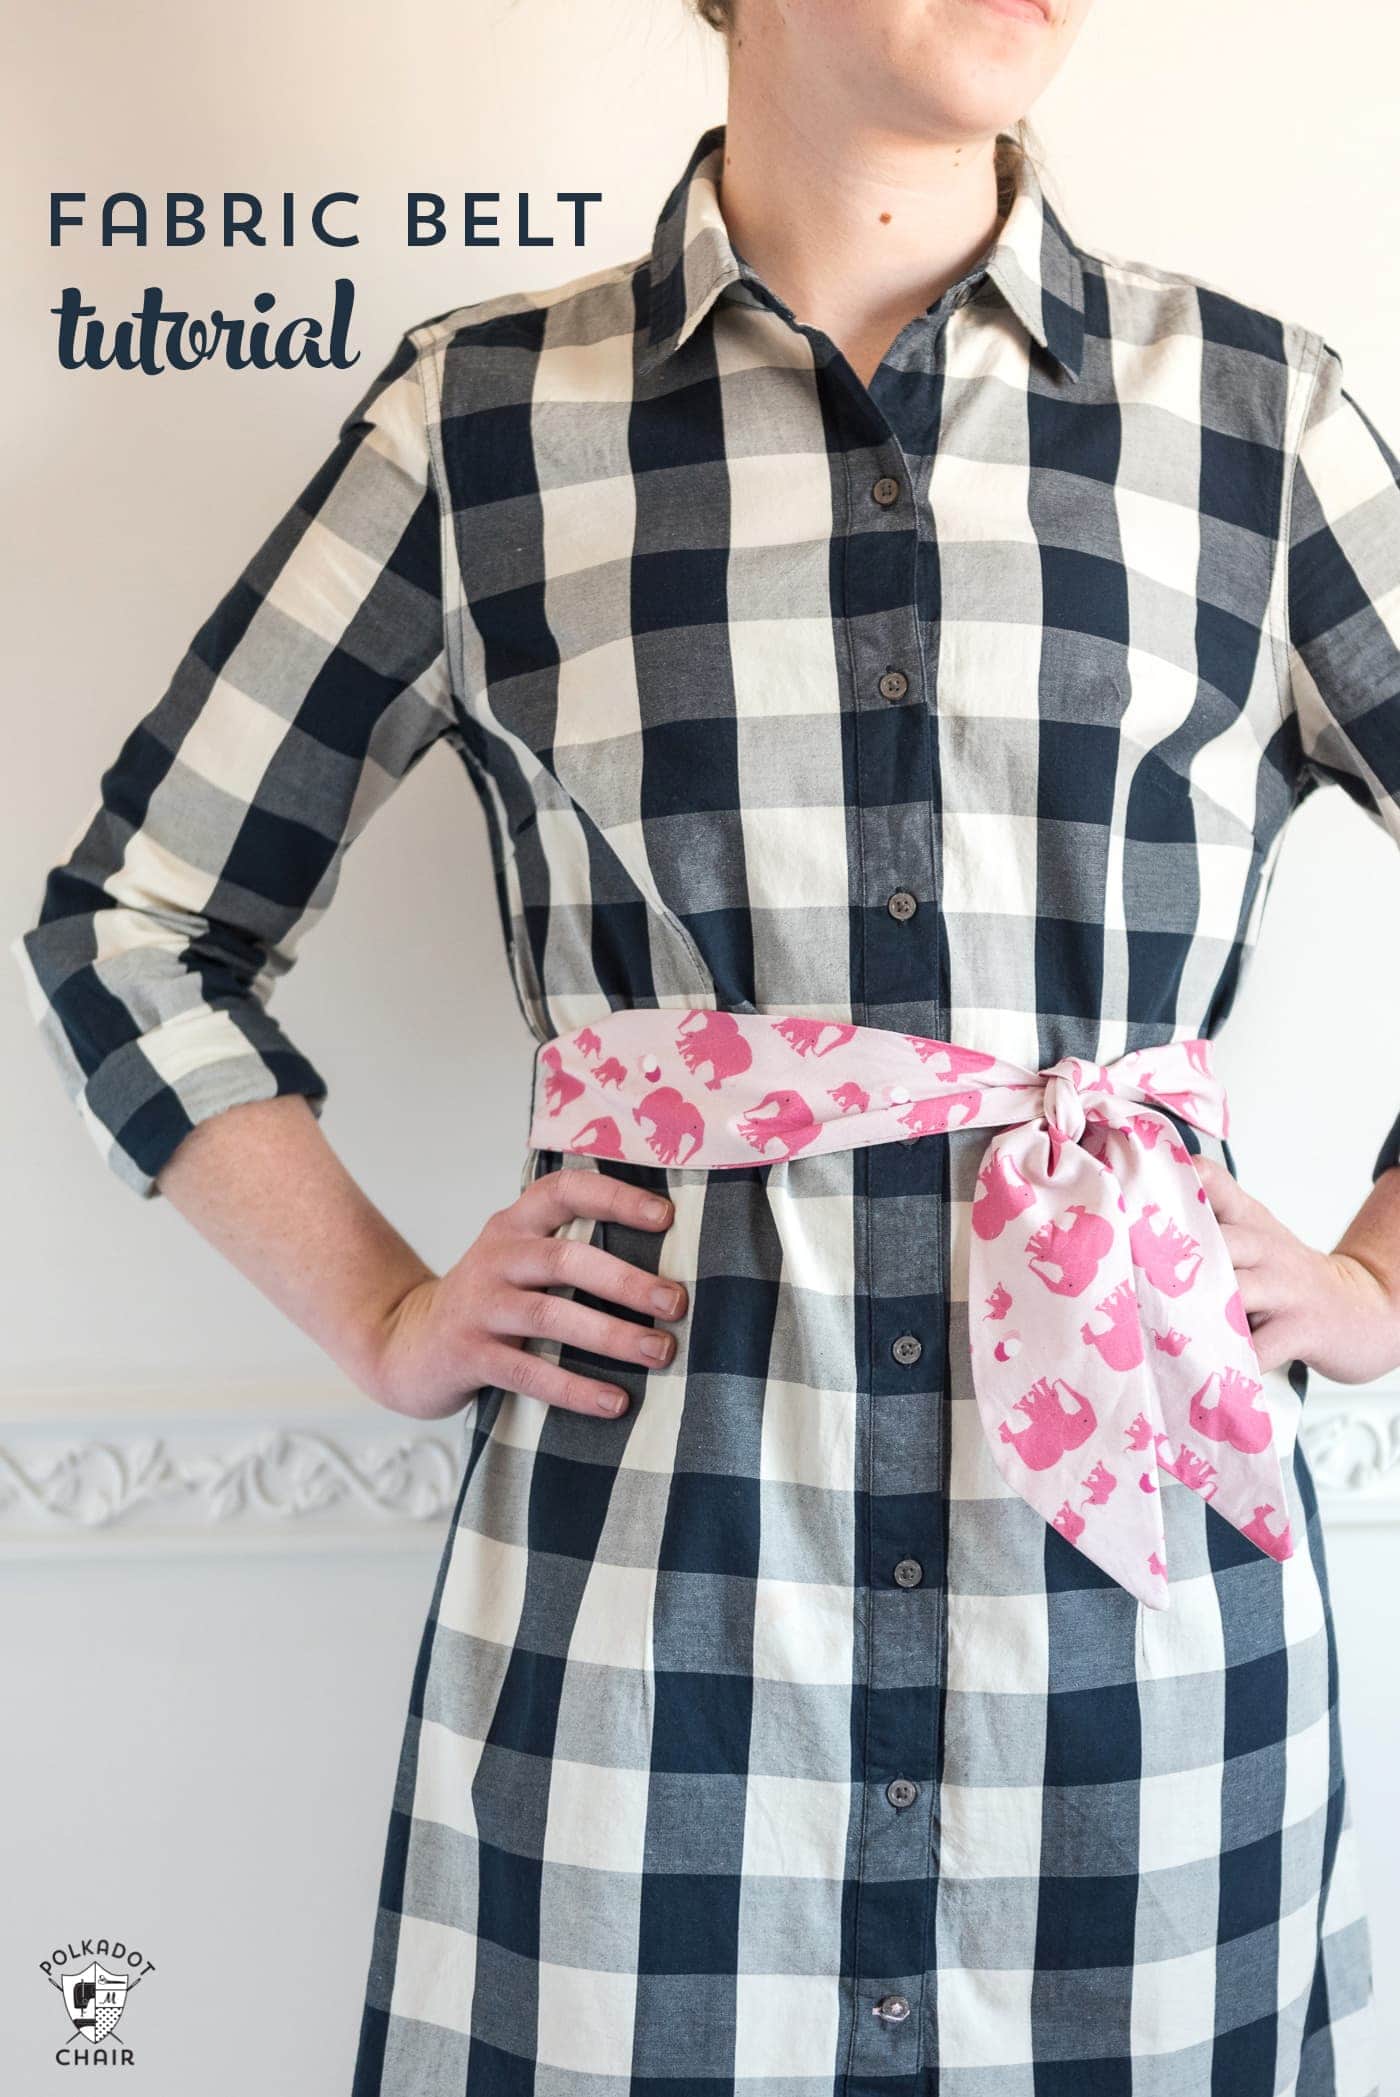 Learn how to make a fabric belt or sash with this free sewing tutorial. Can be made in multiple sizes. #FabricBeltTutorial #fabricbelt #sewingtutorial 